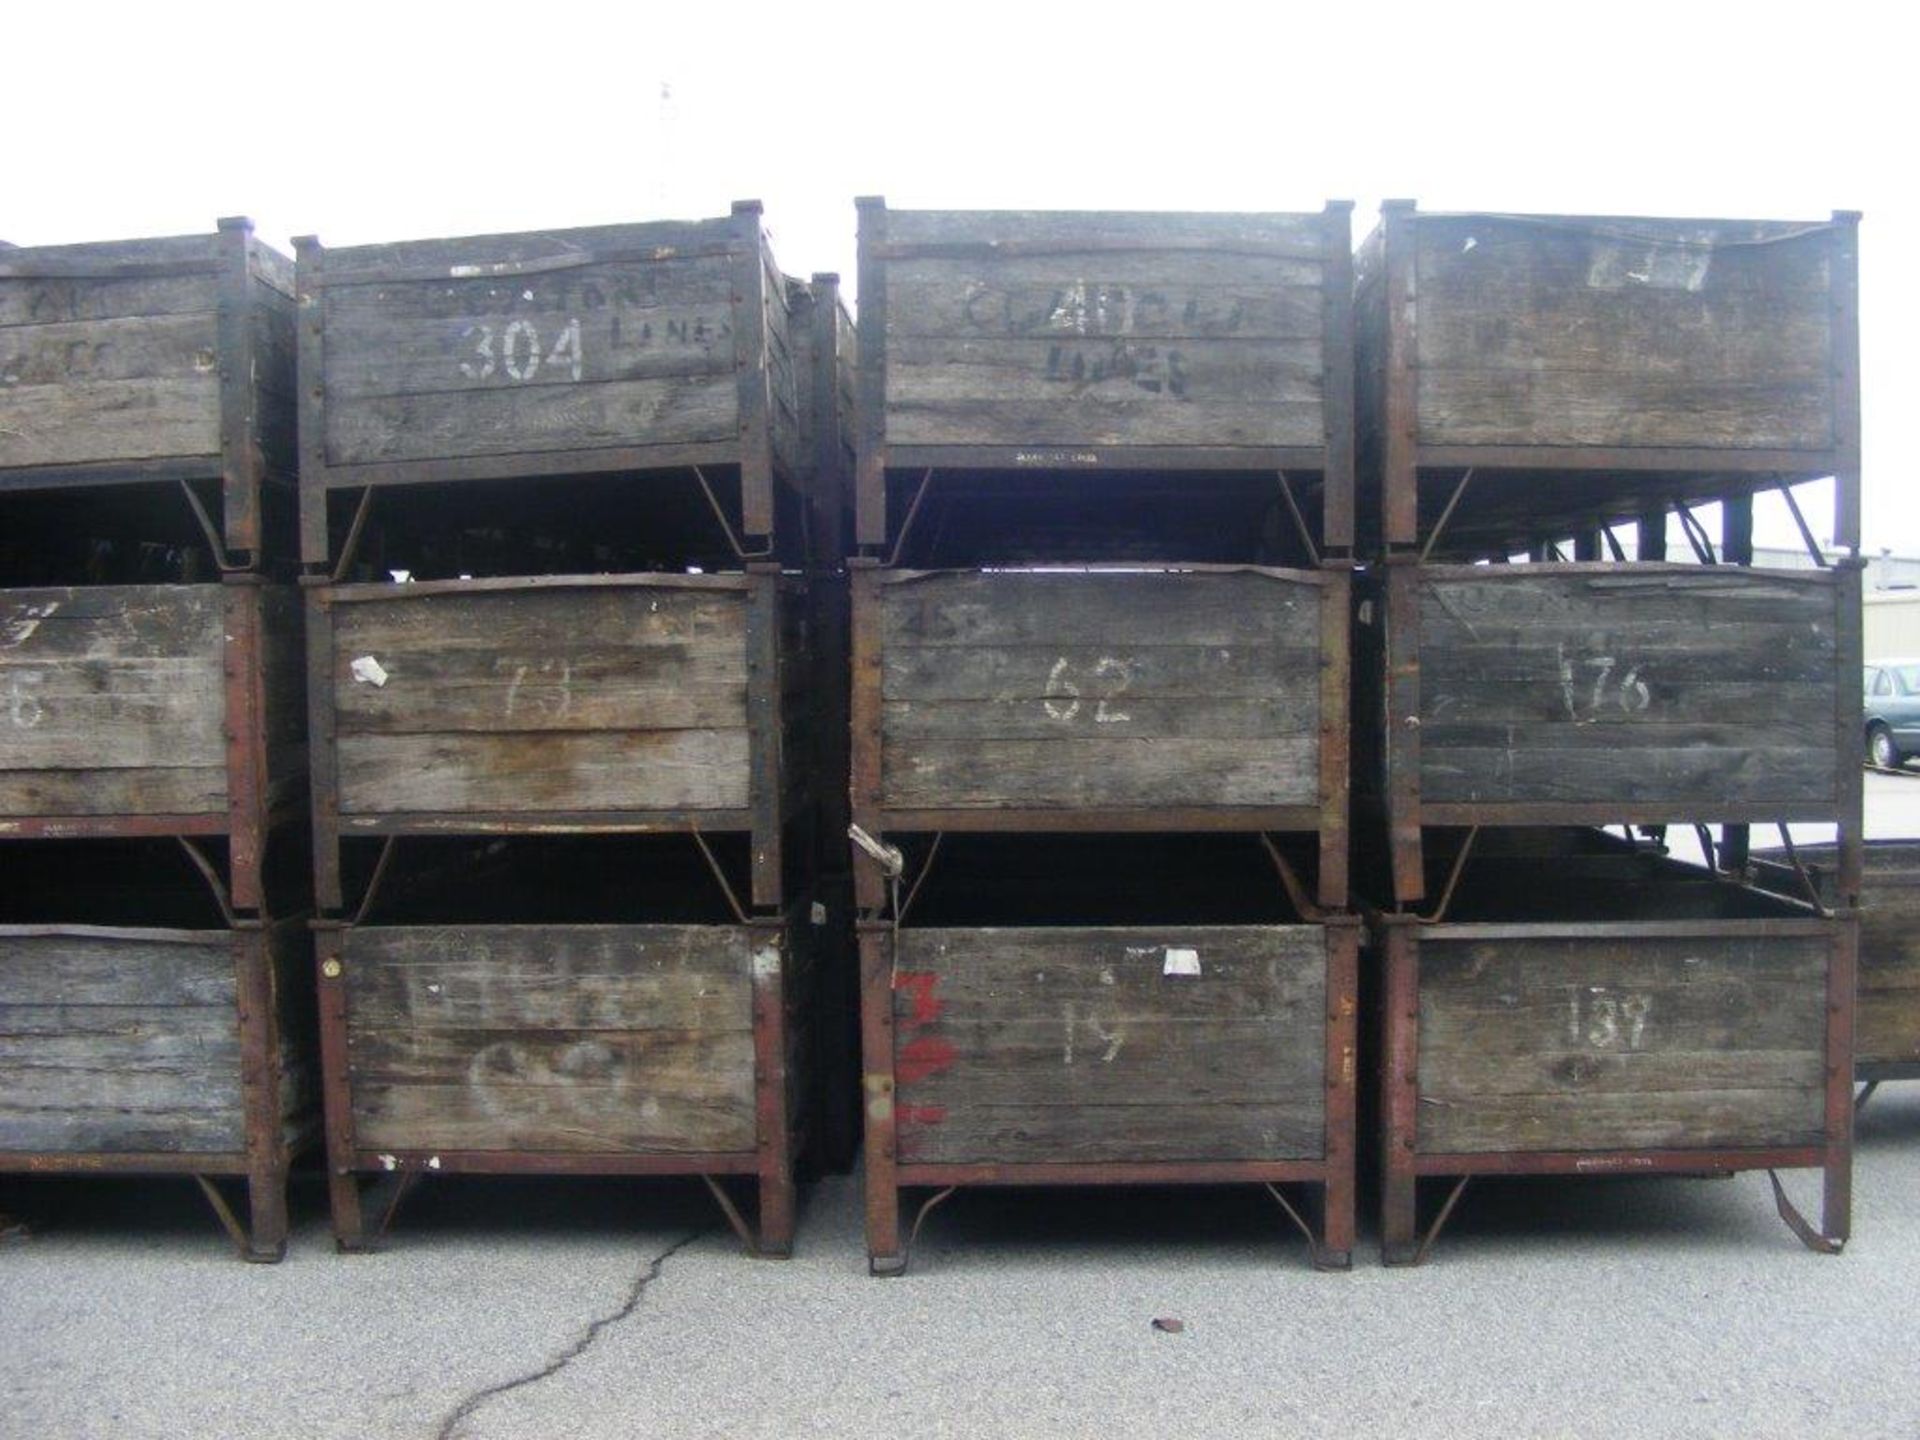 48"L X 36"W X 36"H WOODEN CONTAINER,